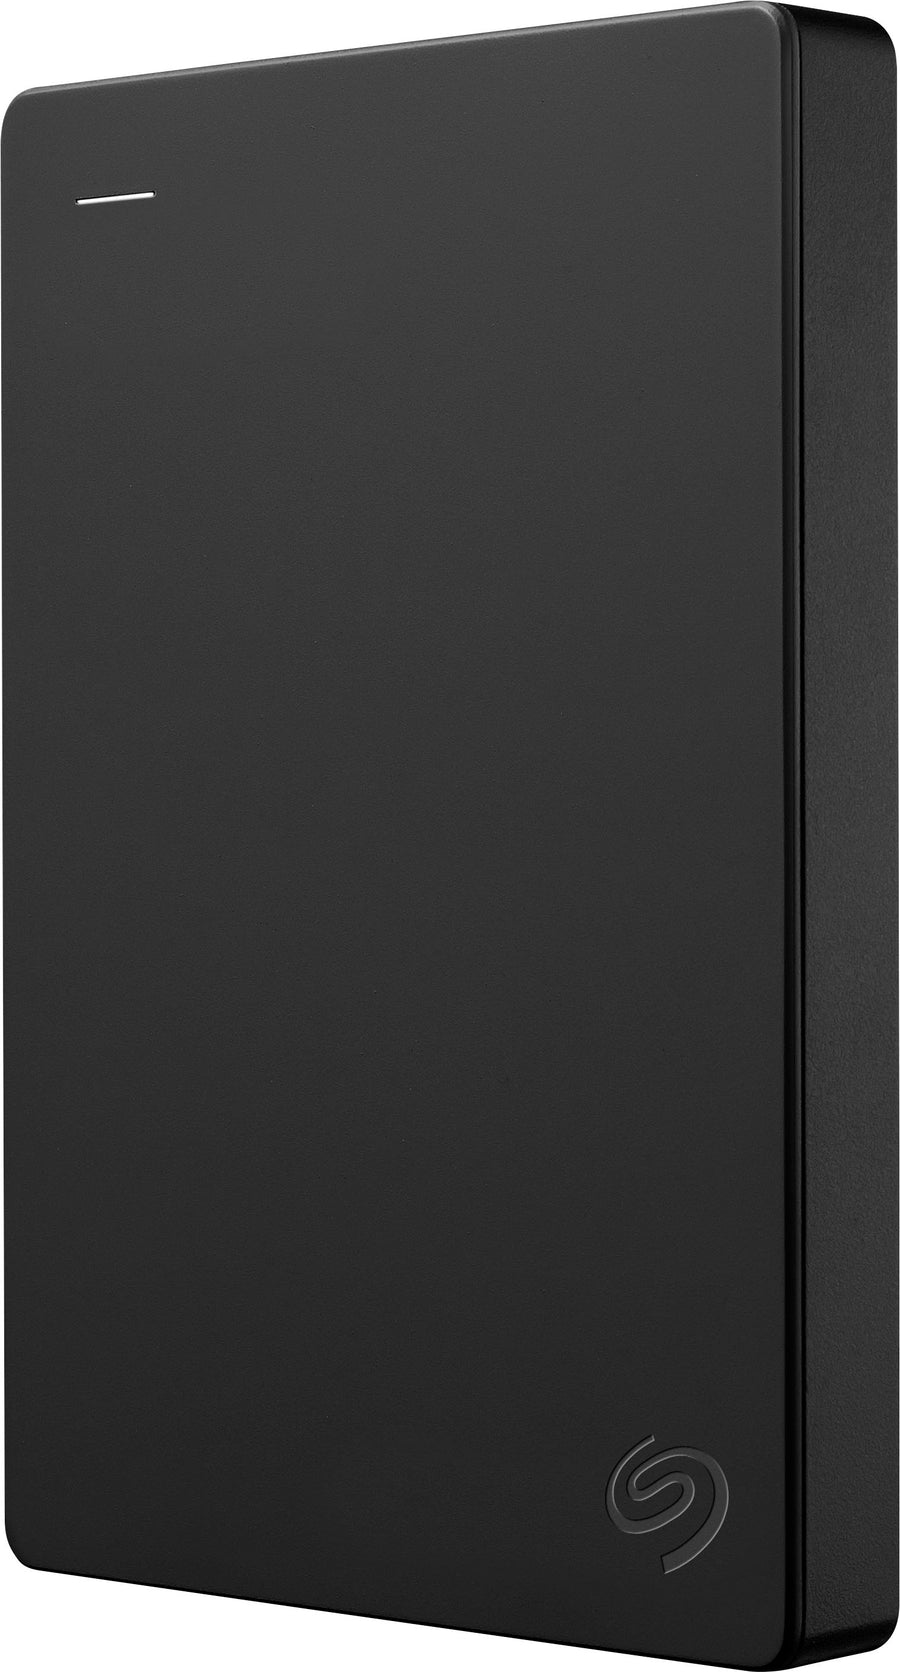 Seagate - Portable 2TB External USB 3.0 Hard Drive with Rescue Data Recovery Services - Black_0